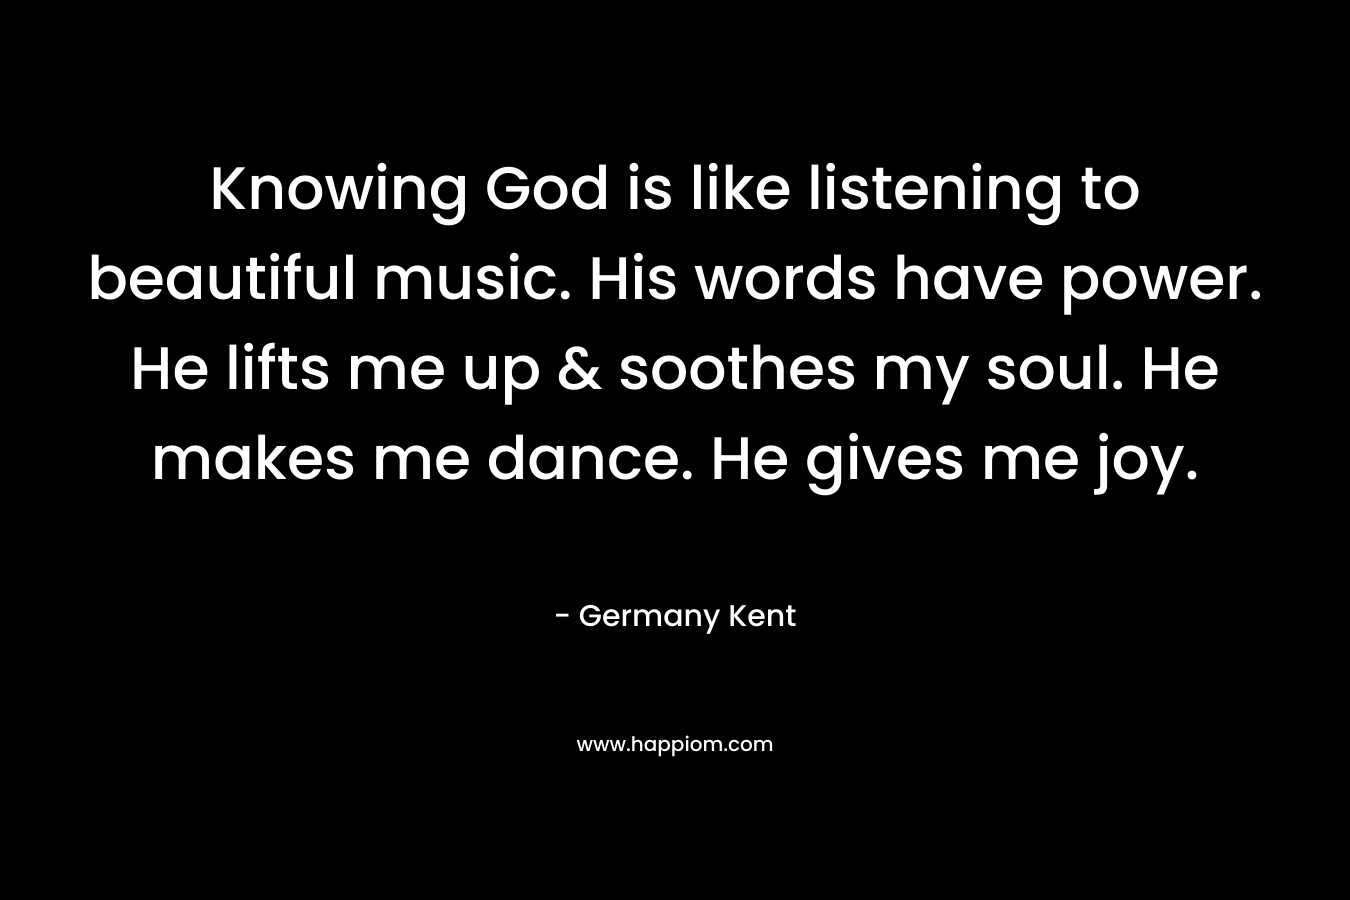 Knowing God is like listening to beautiful music. His words have power. He lifts me up & soothes my soul. He makes me dance. He gives me joy. – Germany Kent